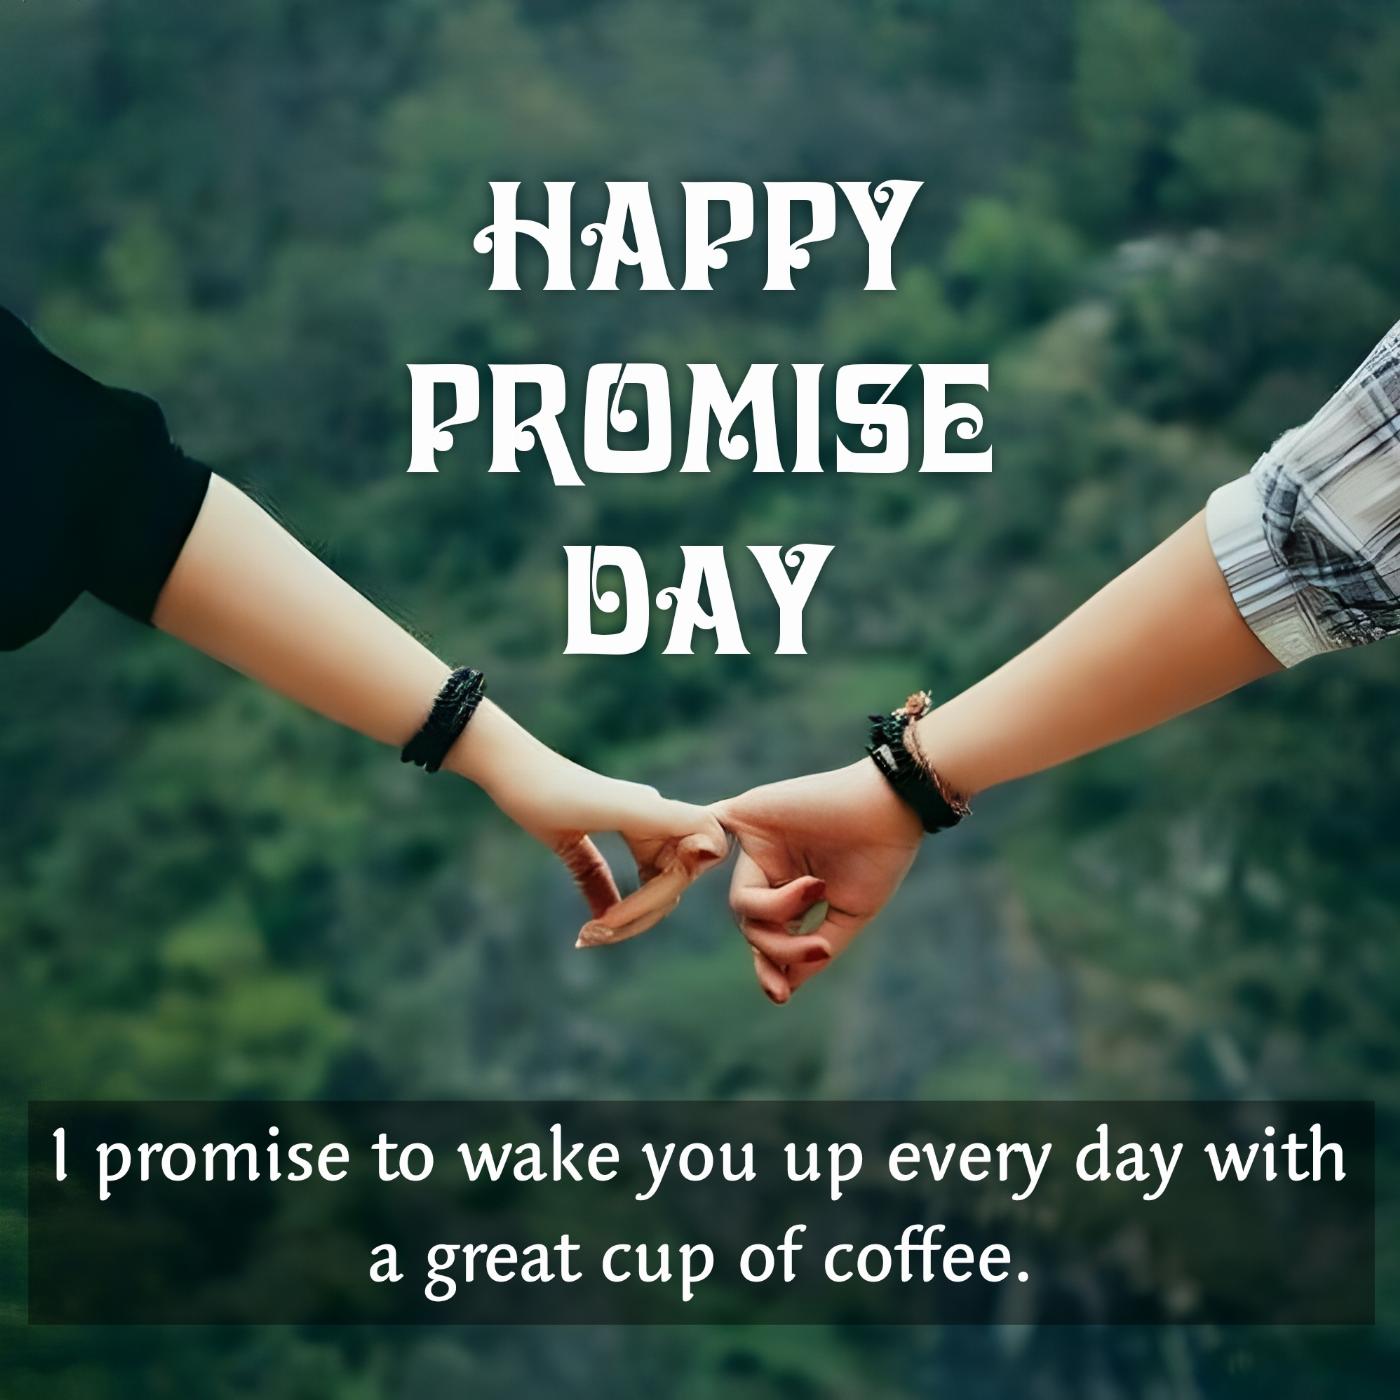 I promise to wake you up every day with a great cup of coffee